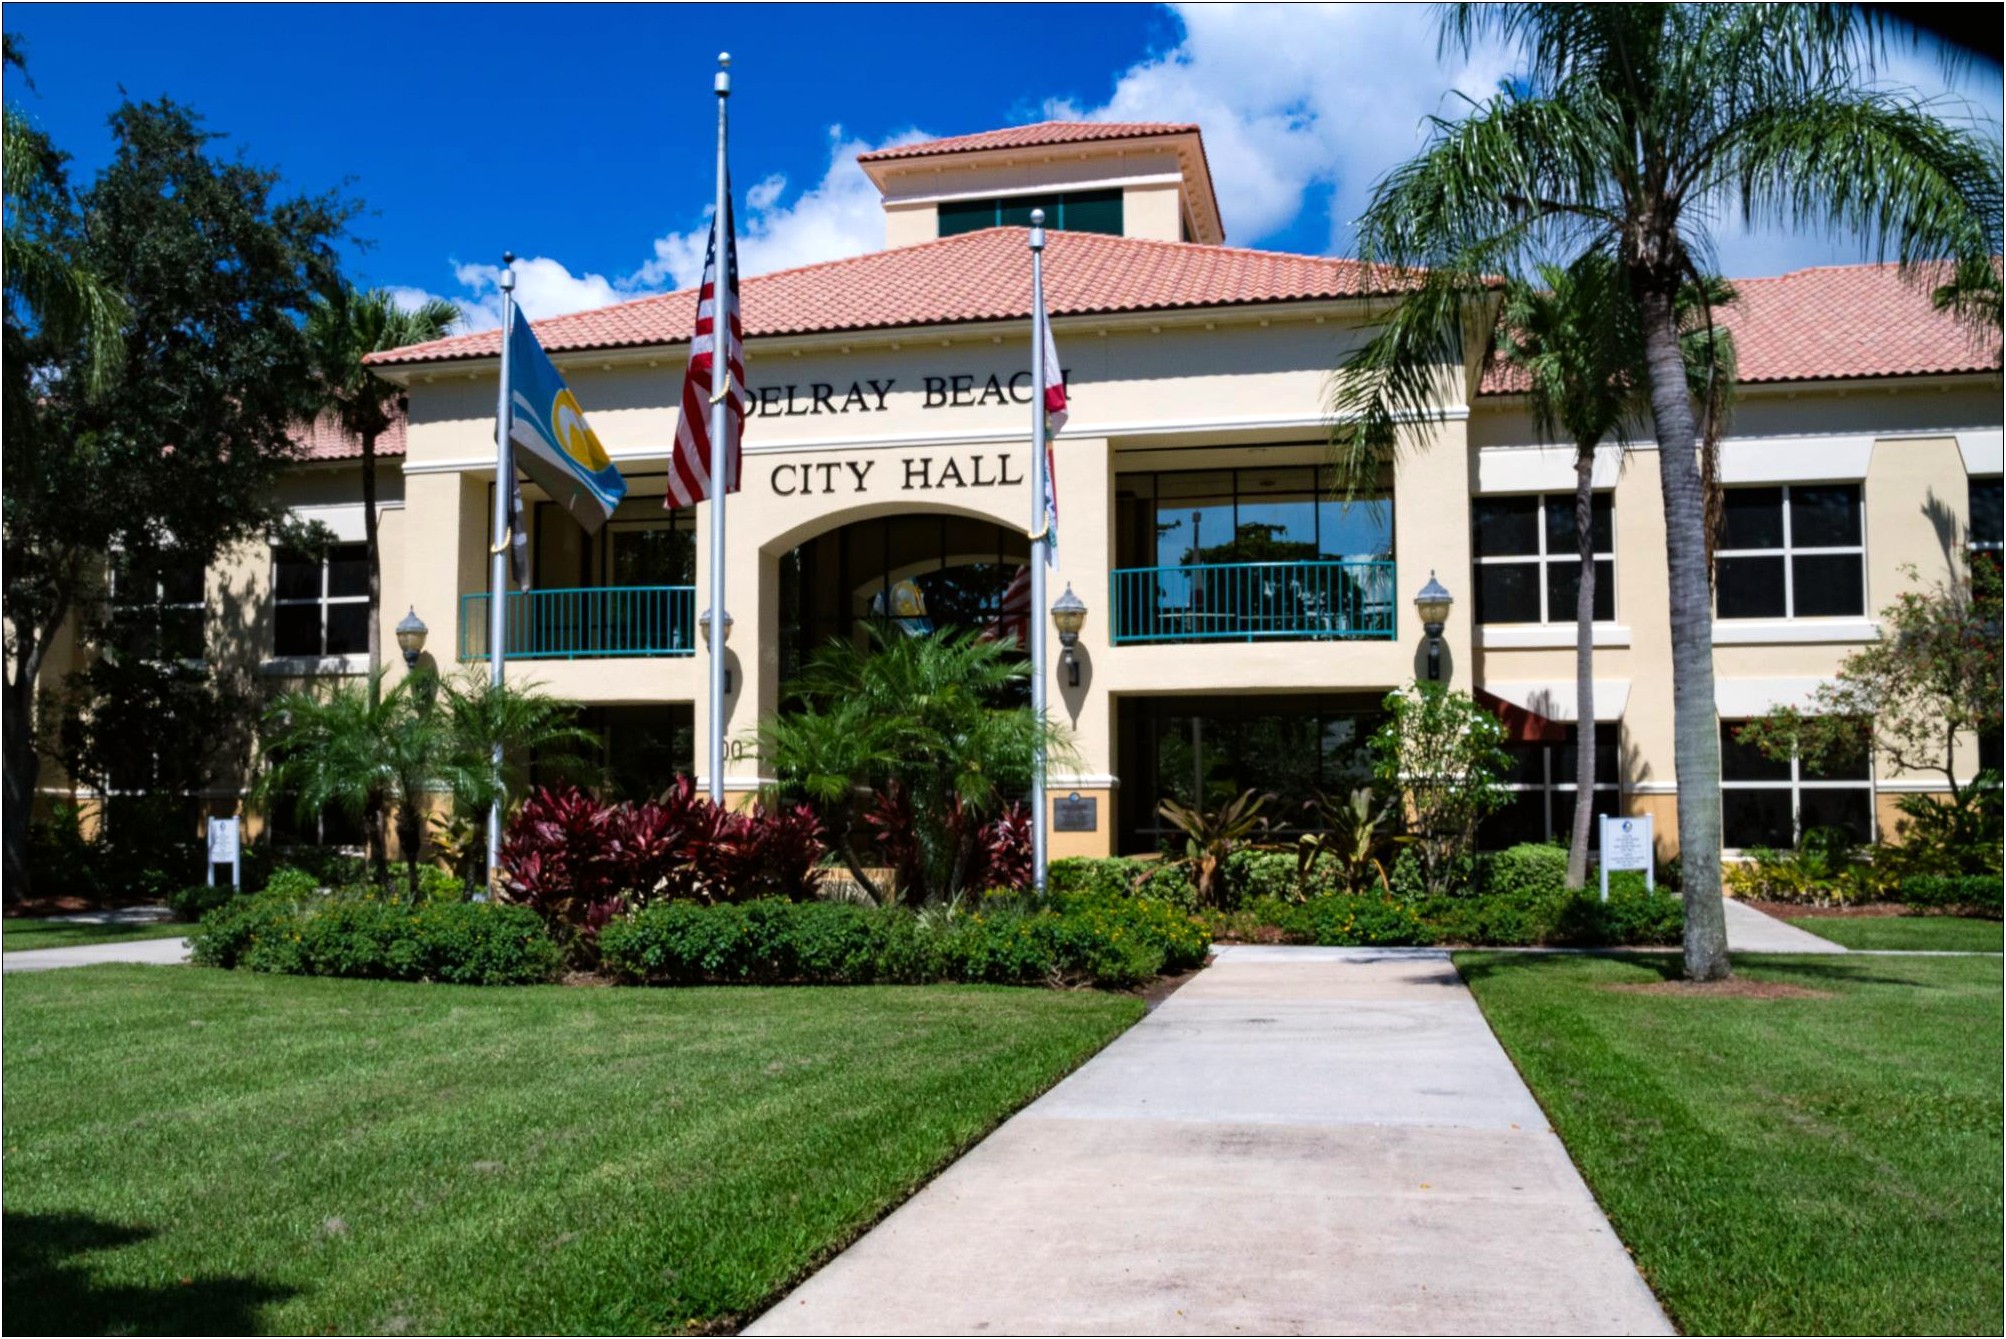 Resumes Of City Manager Applicants For Delray Beach